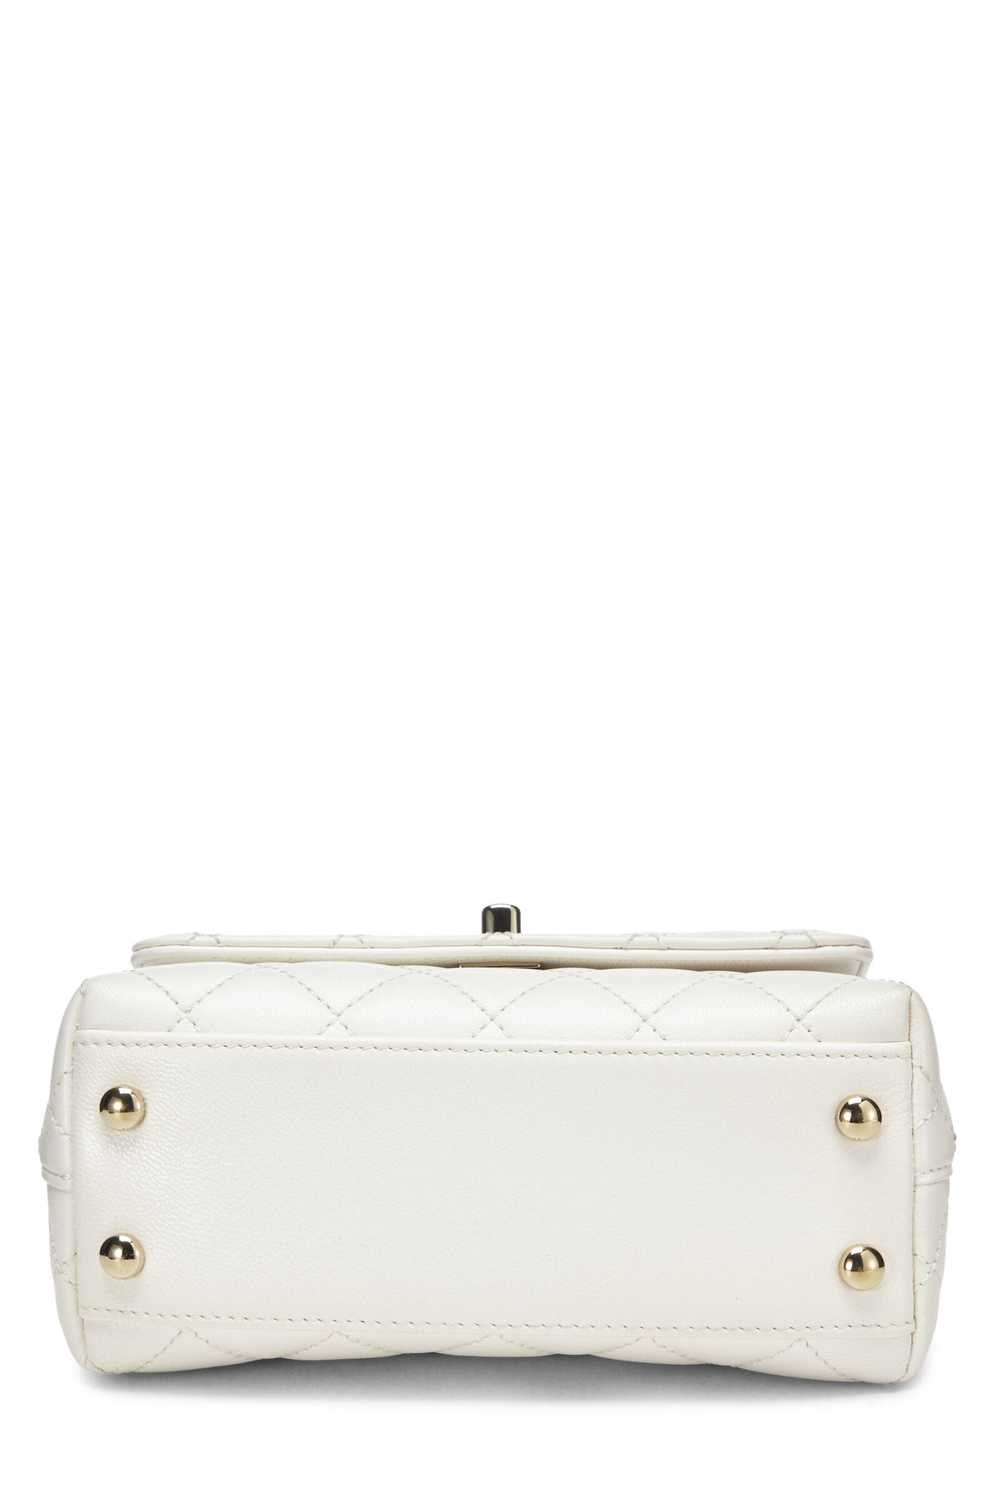 White Quilted Lambskin Rainbow Coco Handle Bag Mi… - image 7